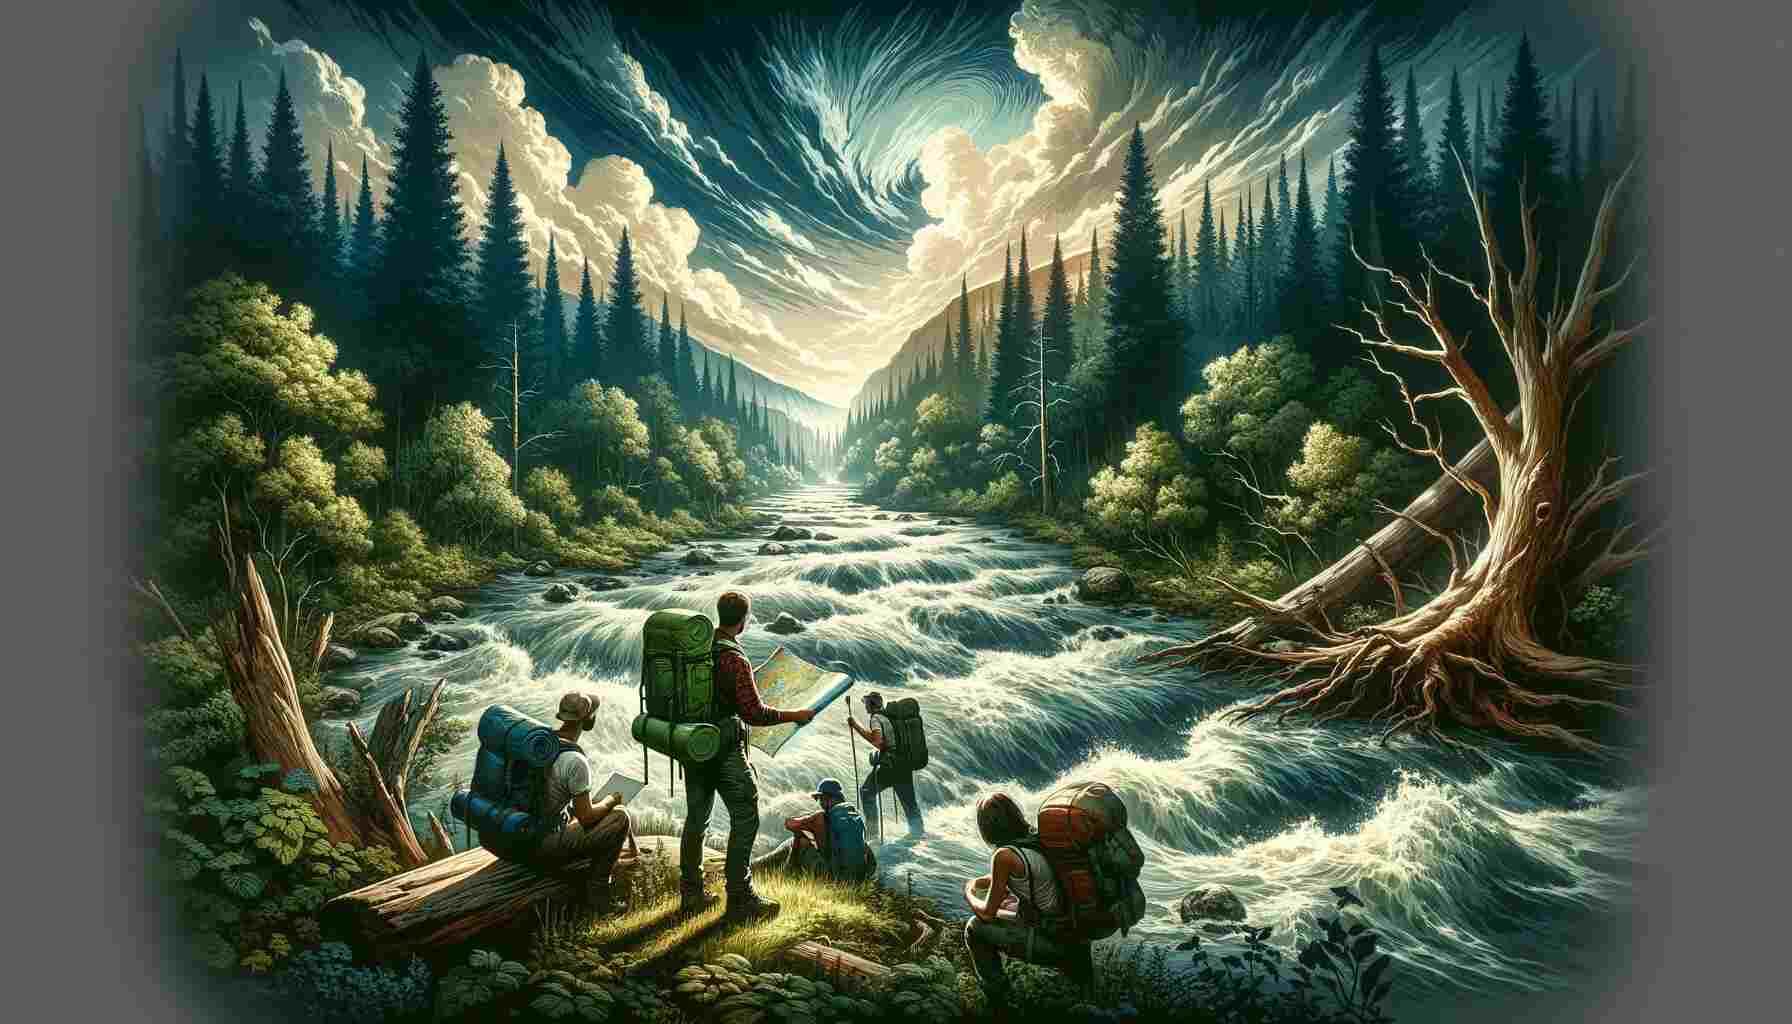 Here's the featured image for the guidebook "Navigating the Rising Tide: A Guide to Flash Flood Safety for Outdoor Enthusiasts." The image showcases a lush forest landscape with a rapidly flowing river, hinting at the onset of a flash flood, and a group of outdoor enthusiasts consulting a map in the foreground. This scene aims to convey both the beauty of nature and the importance of being prepared for flash flood conditions.